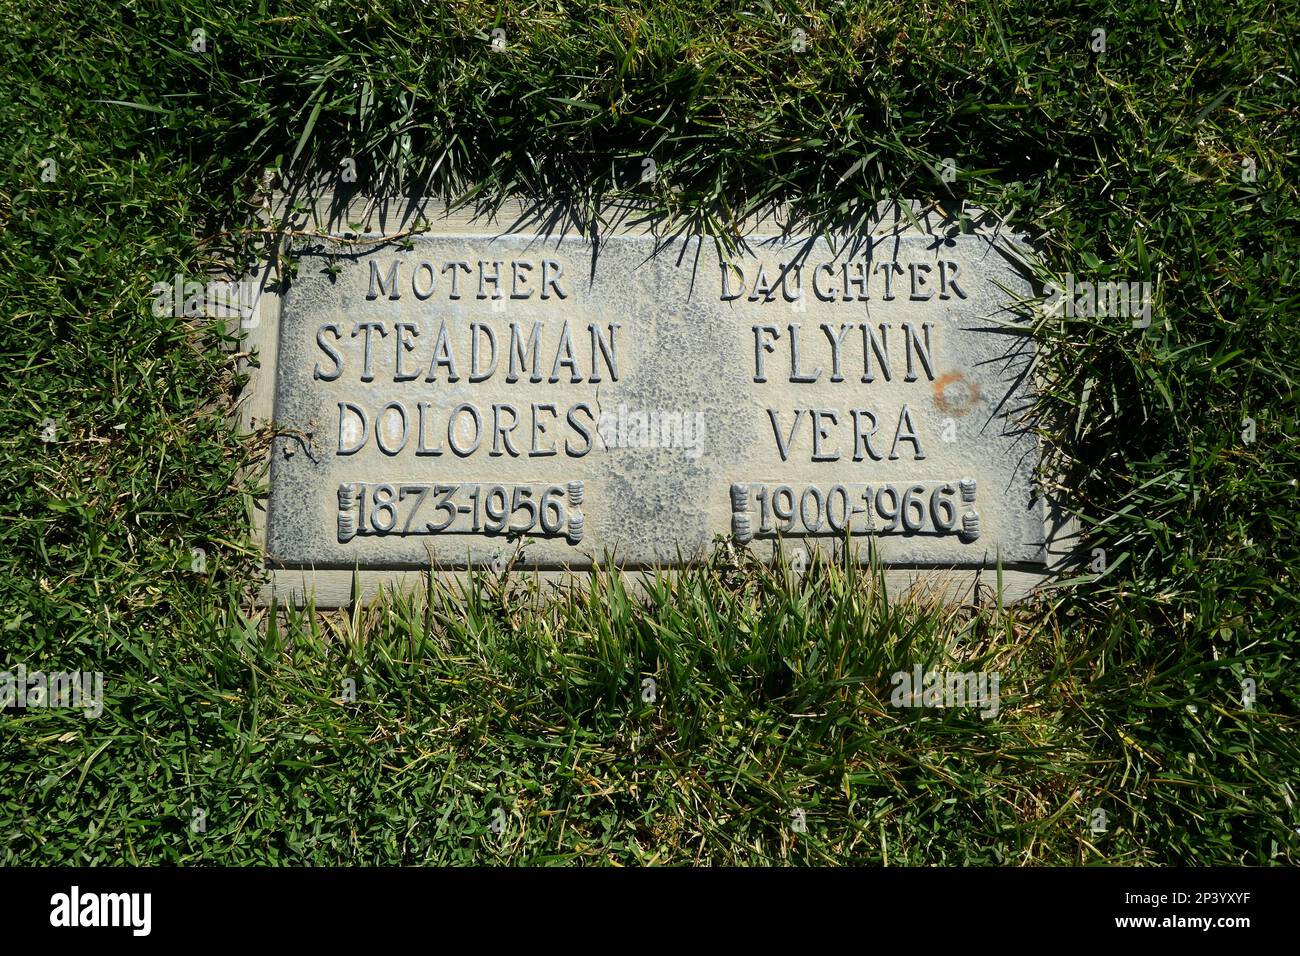 Long Beach, California, USA 2nd March 2023 Actress Vera Steadman's Grave in Erica Section at Forest Lawn Long Beach Memorial Park Cemetery on March 2, 2023 in Long Beach, California, USA. Photo by Barry King/Alamy Stock Photo Stock Photo